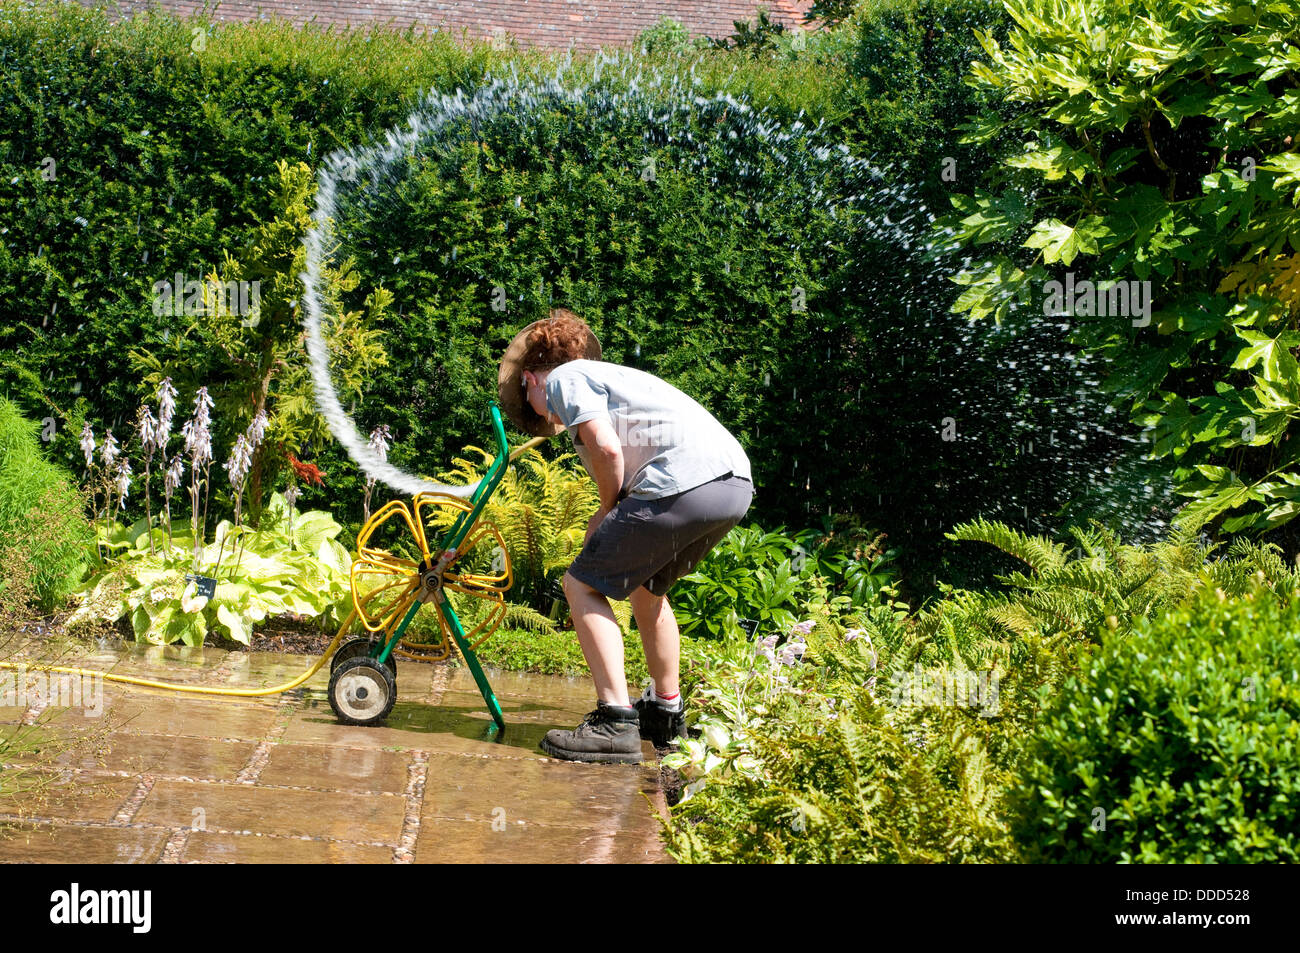 Gardener trying to sort out the hose of water squirting everywhere Stock Photo